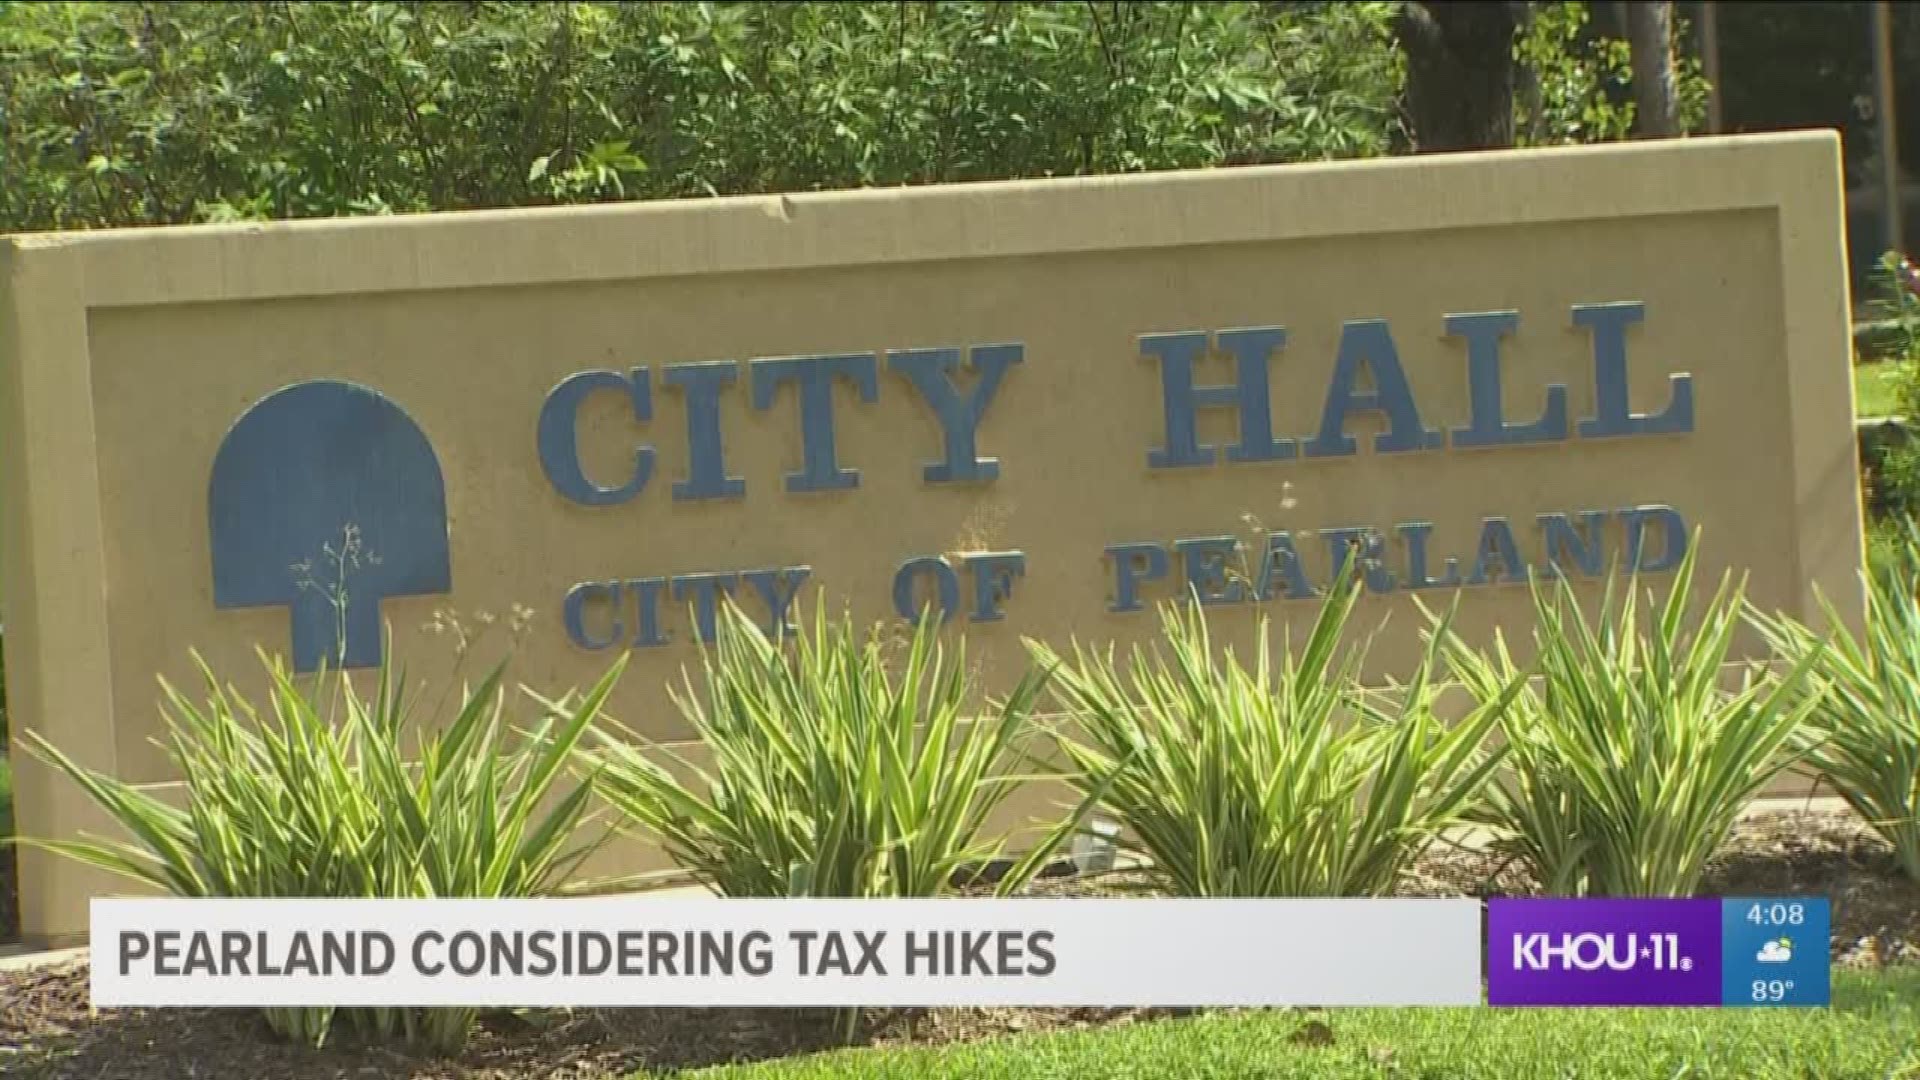 Pearland city leaders are considering a 2-cent tax hike.